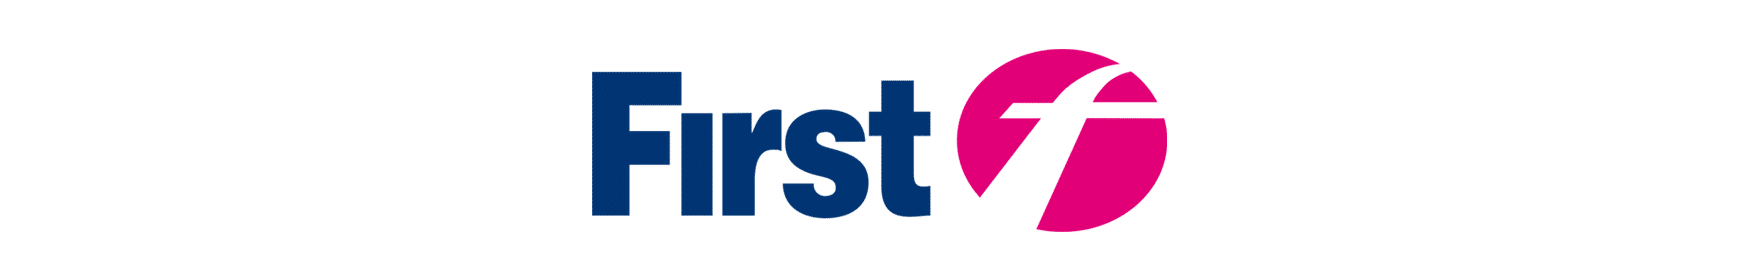 FirstGroup Case Study